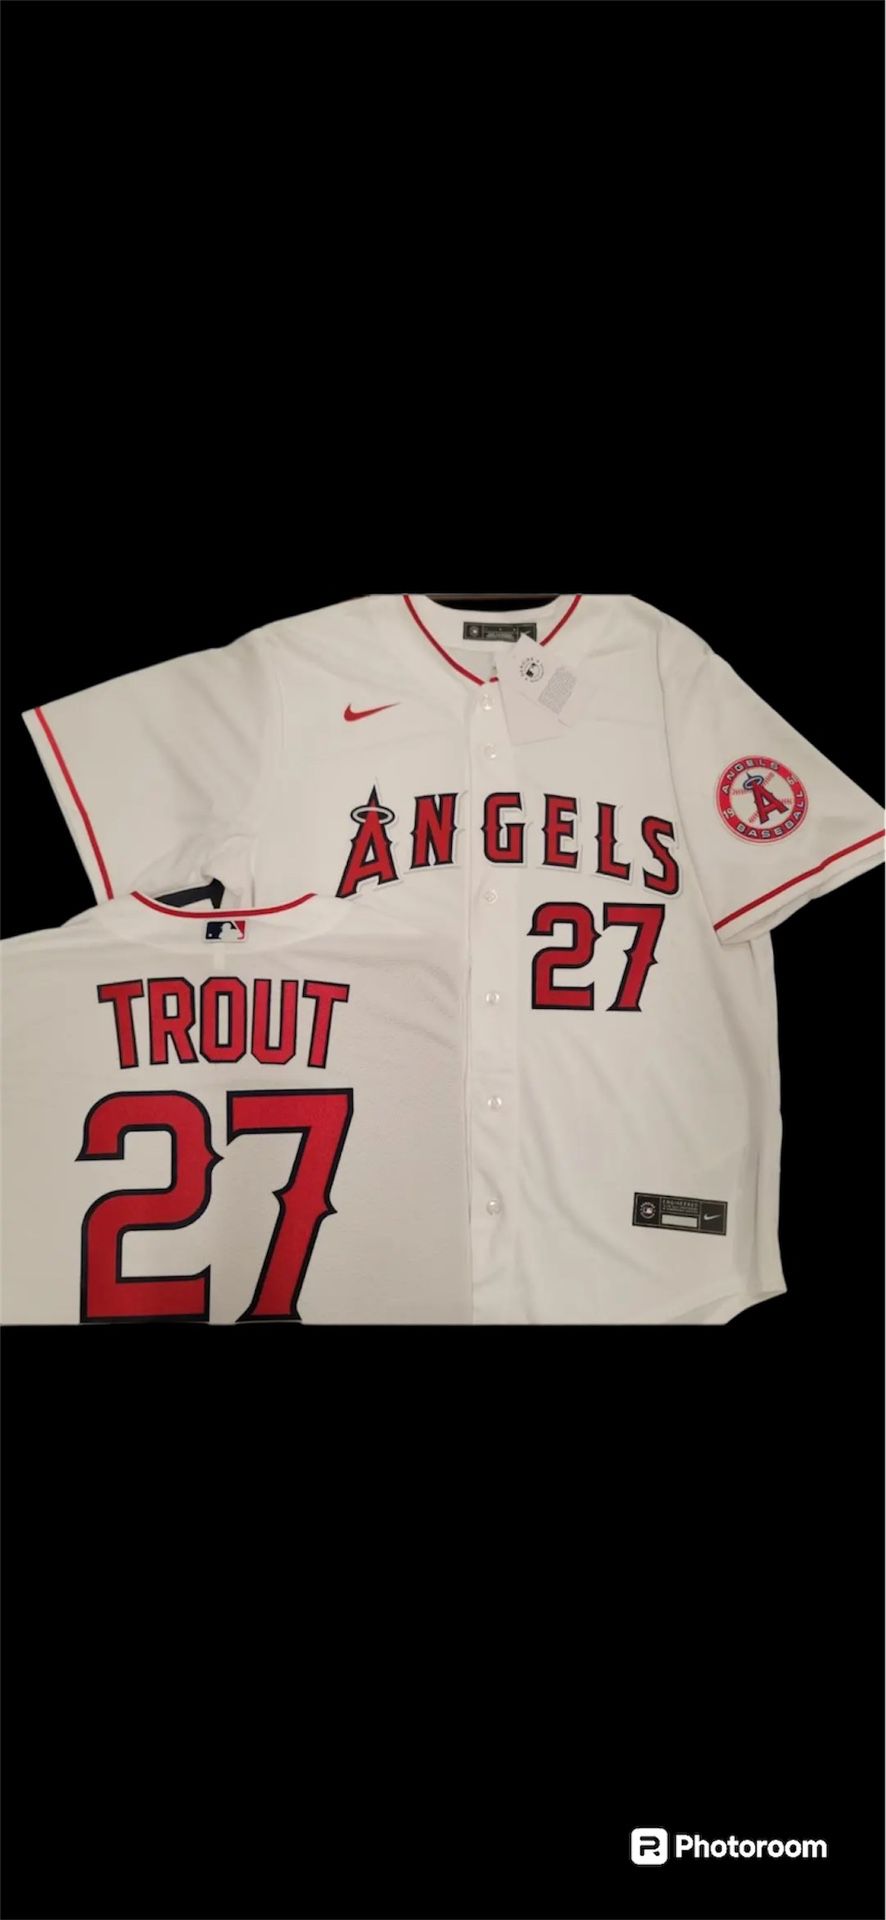 Mike Trout #27 Los Angeles Angels Nike Stitched Home White Jersey NWT SIZE XL